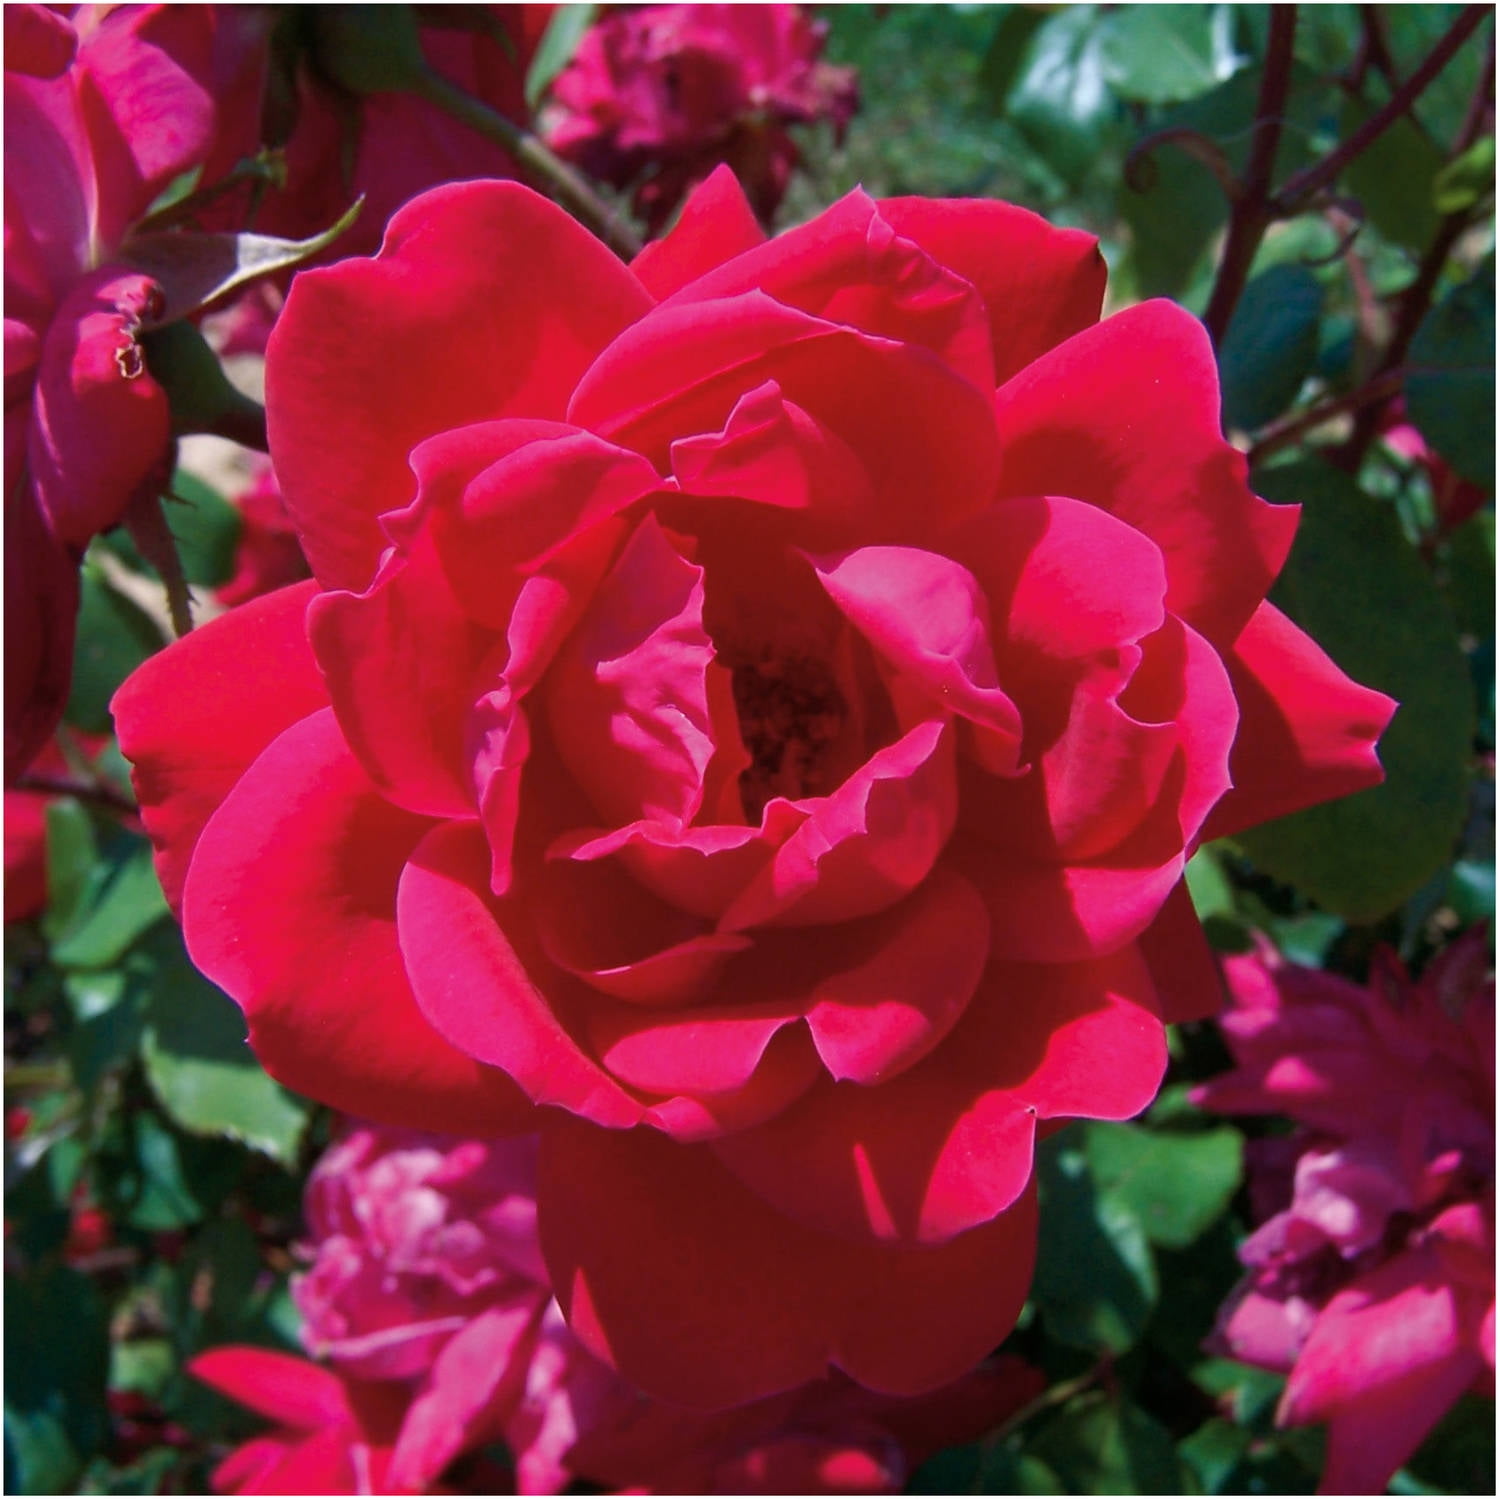 The Red Double Knock Out Rose - Live Flowering Plants - 1 ...